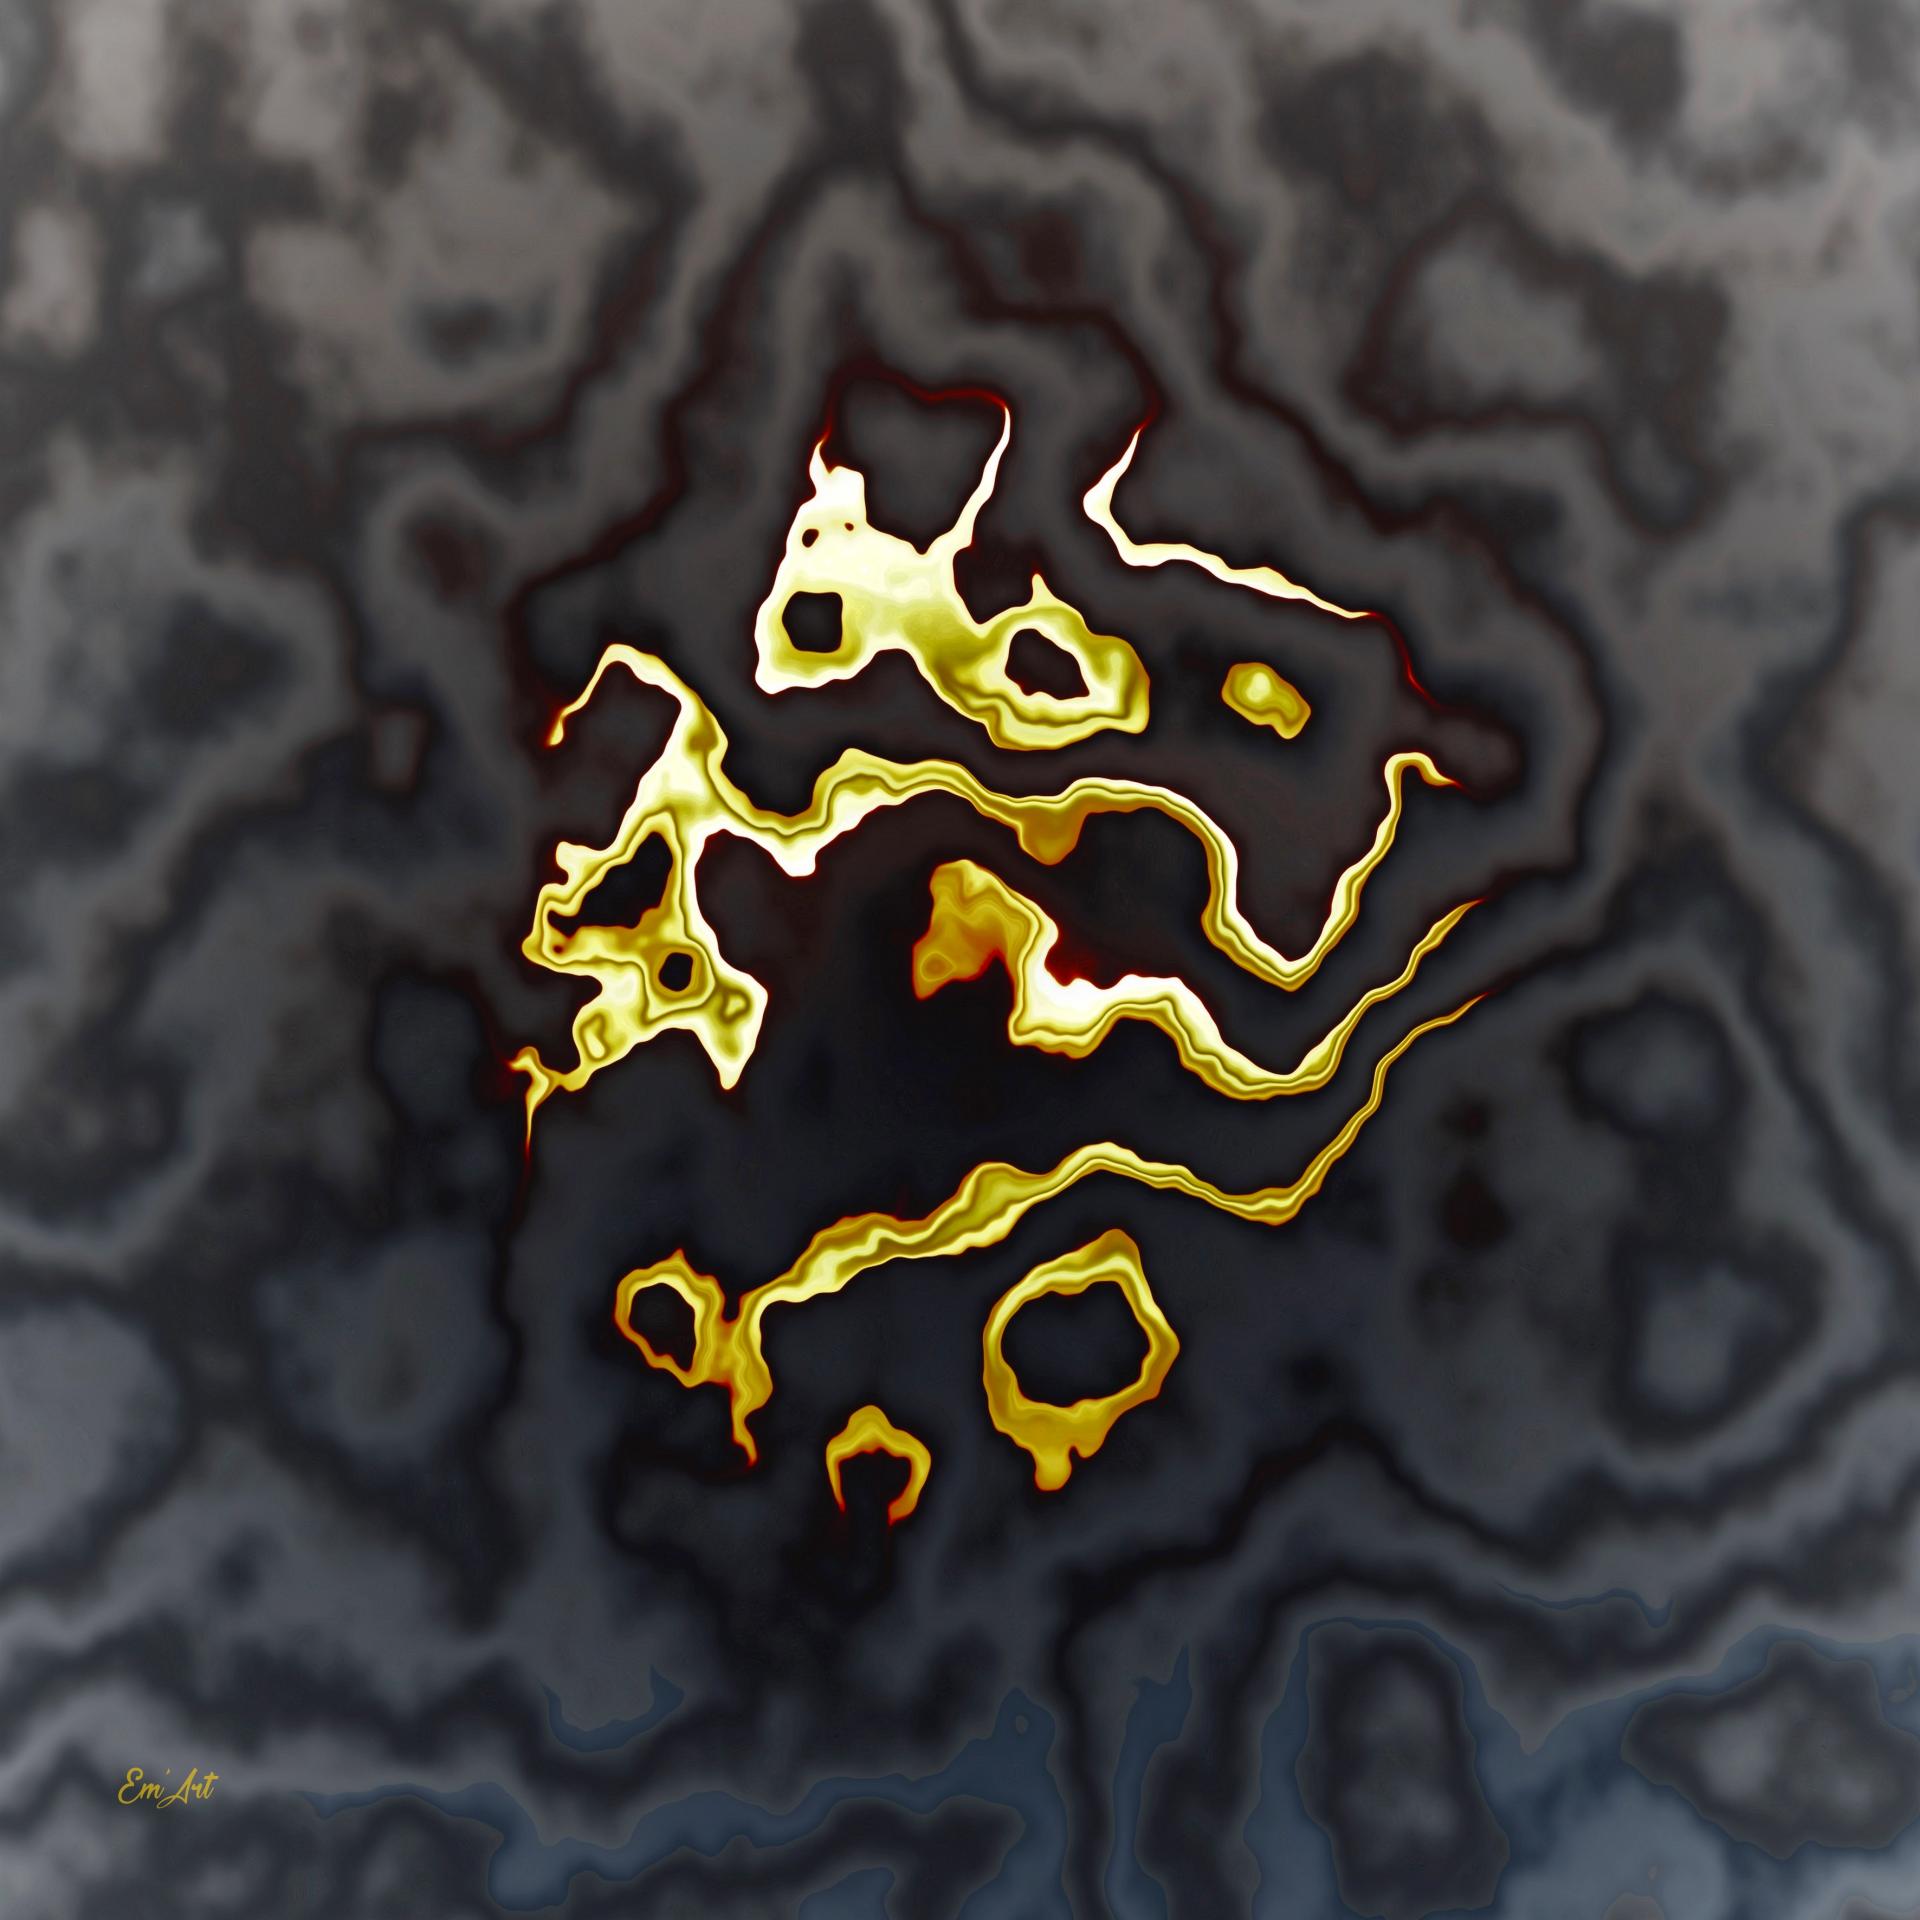 For all the Gold of China, Abstract digital art by Em'Art